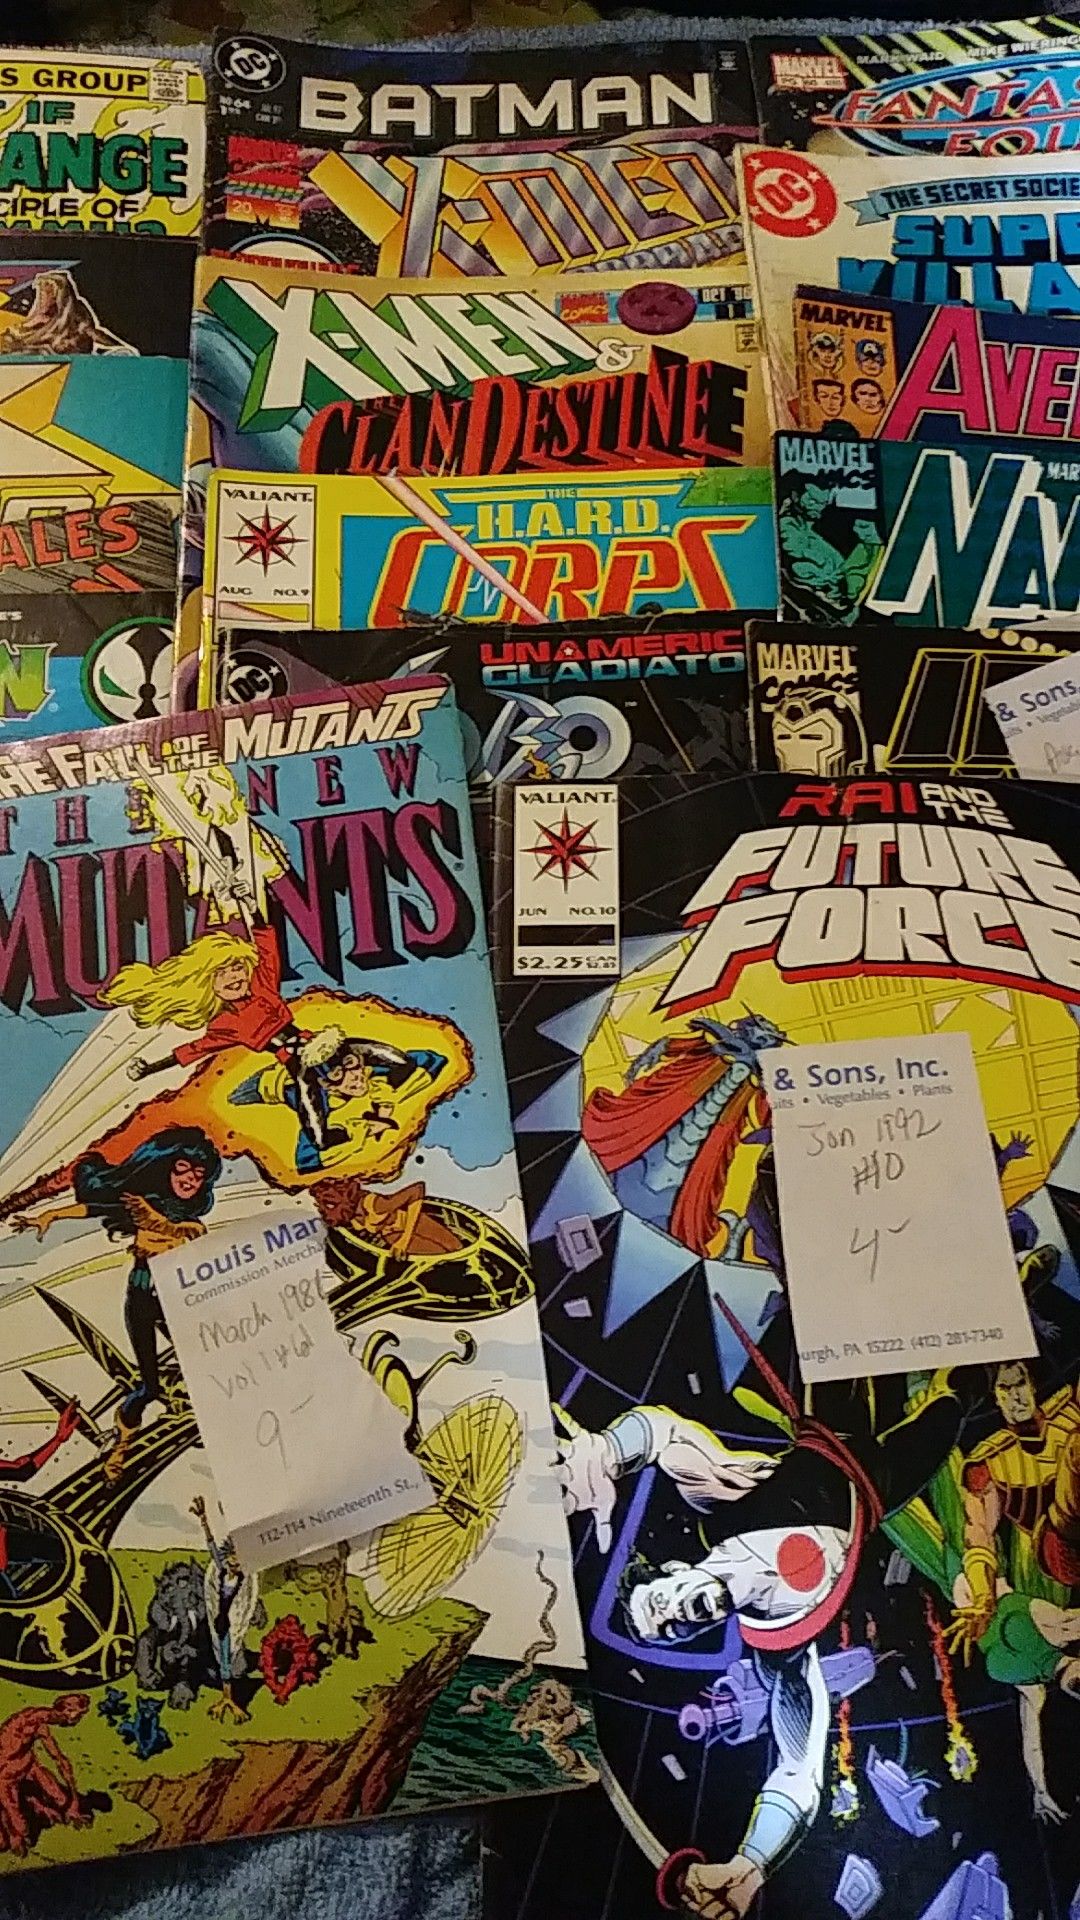 Comic Book Collection ask $175. Sell indiv too. Retail $400